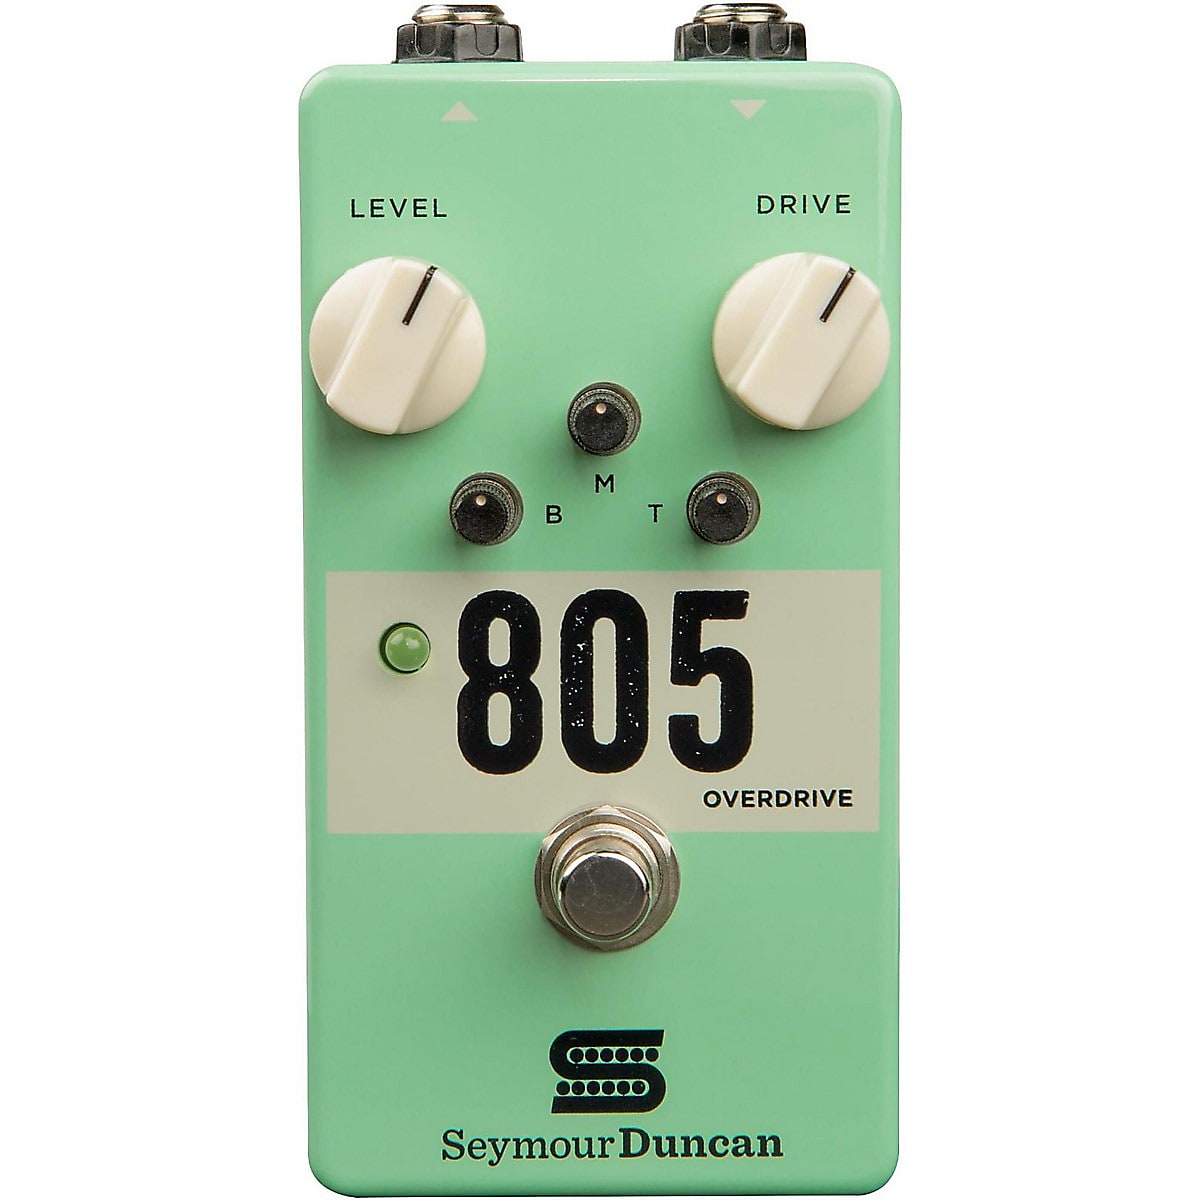 Seymour Duncan 805 Overdrive Effects Pedal